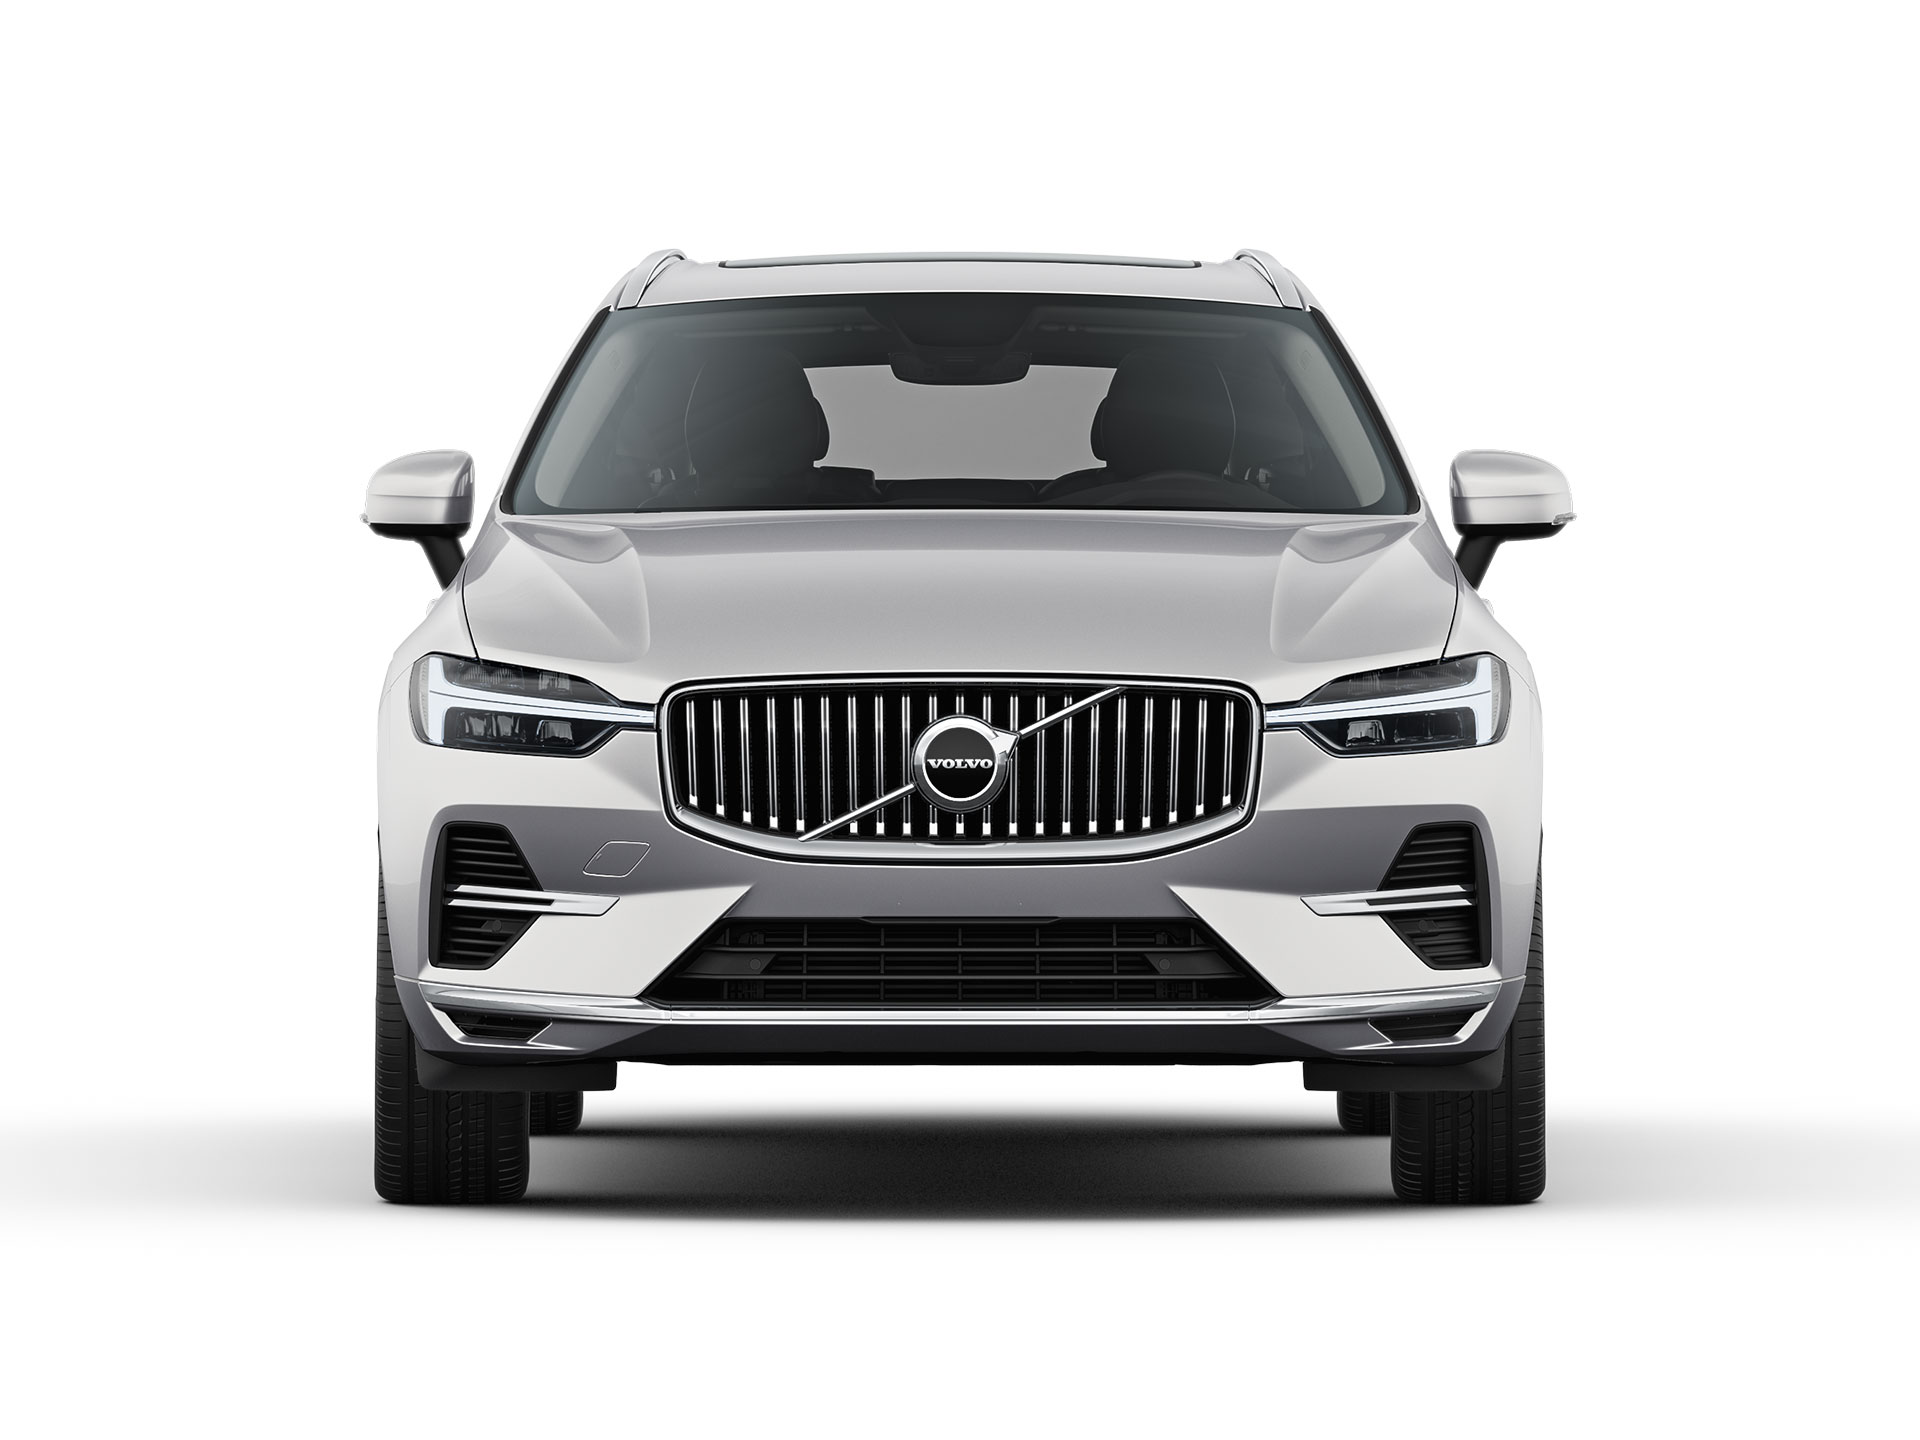 The front of a Volvo XC60 Recharge plug-in hybrid SUV.